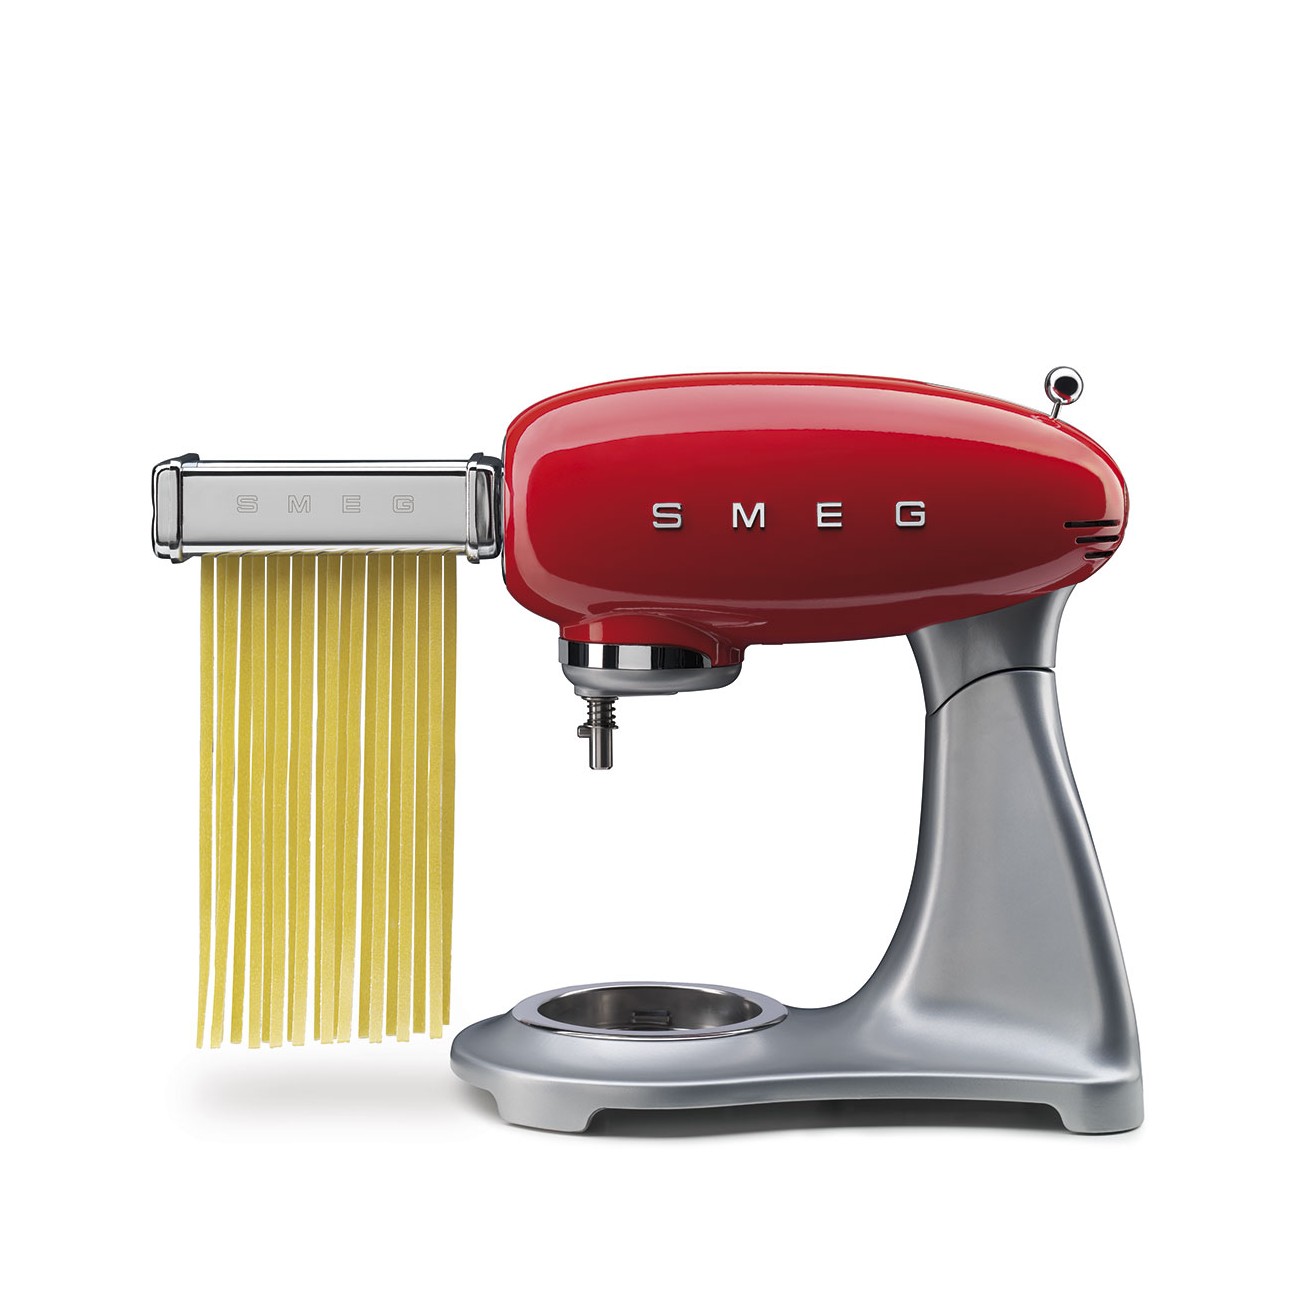 https://www.tattahome.com/126975-large_default/smeg-accessories-for-stand-mixer-pasta-roller-and-cutter-set.jpg